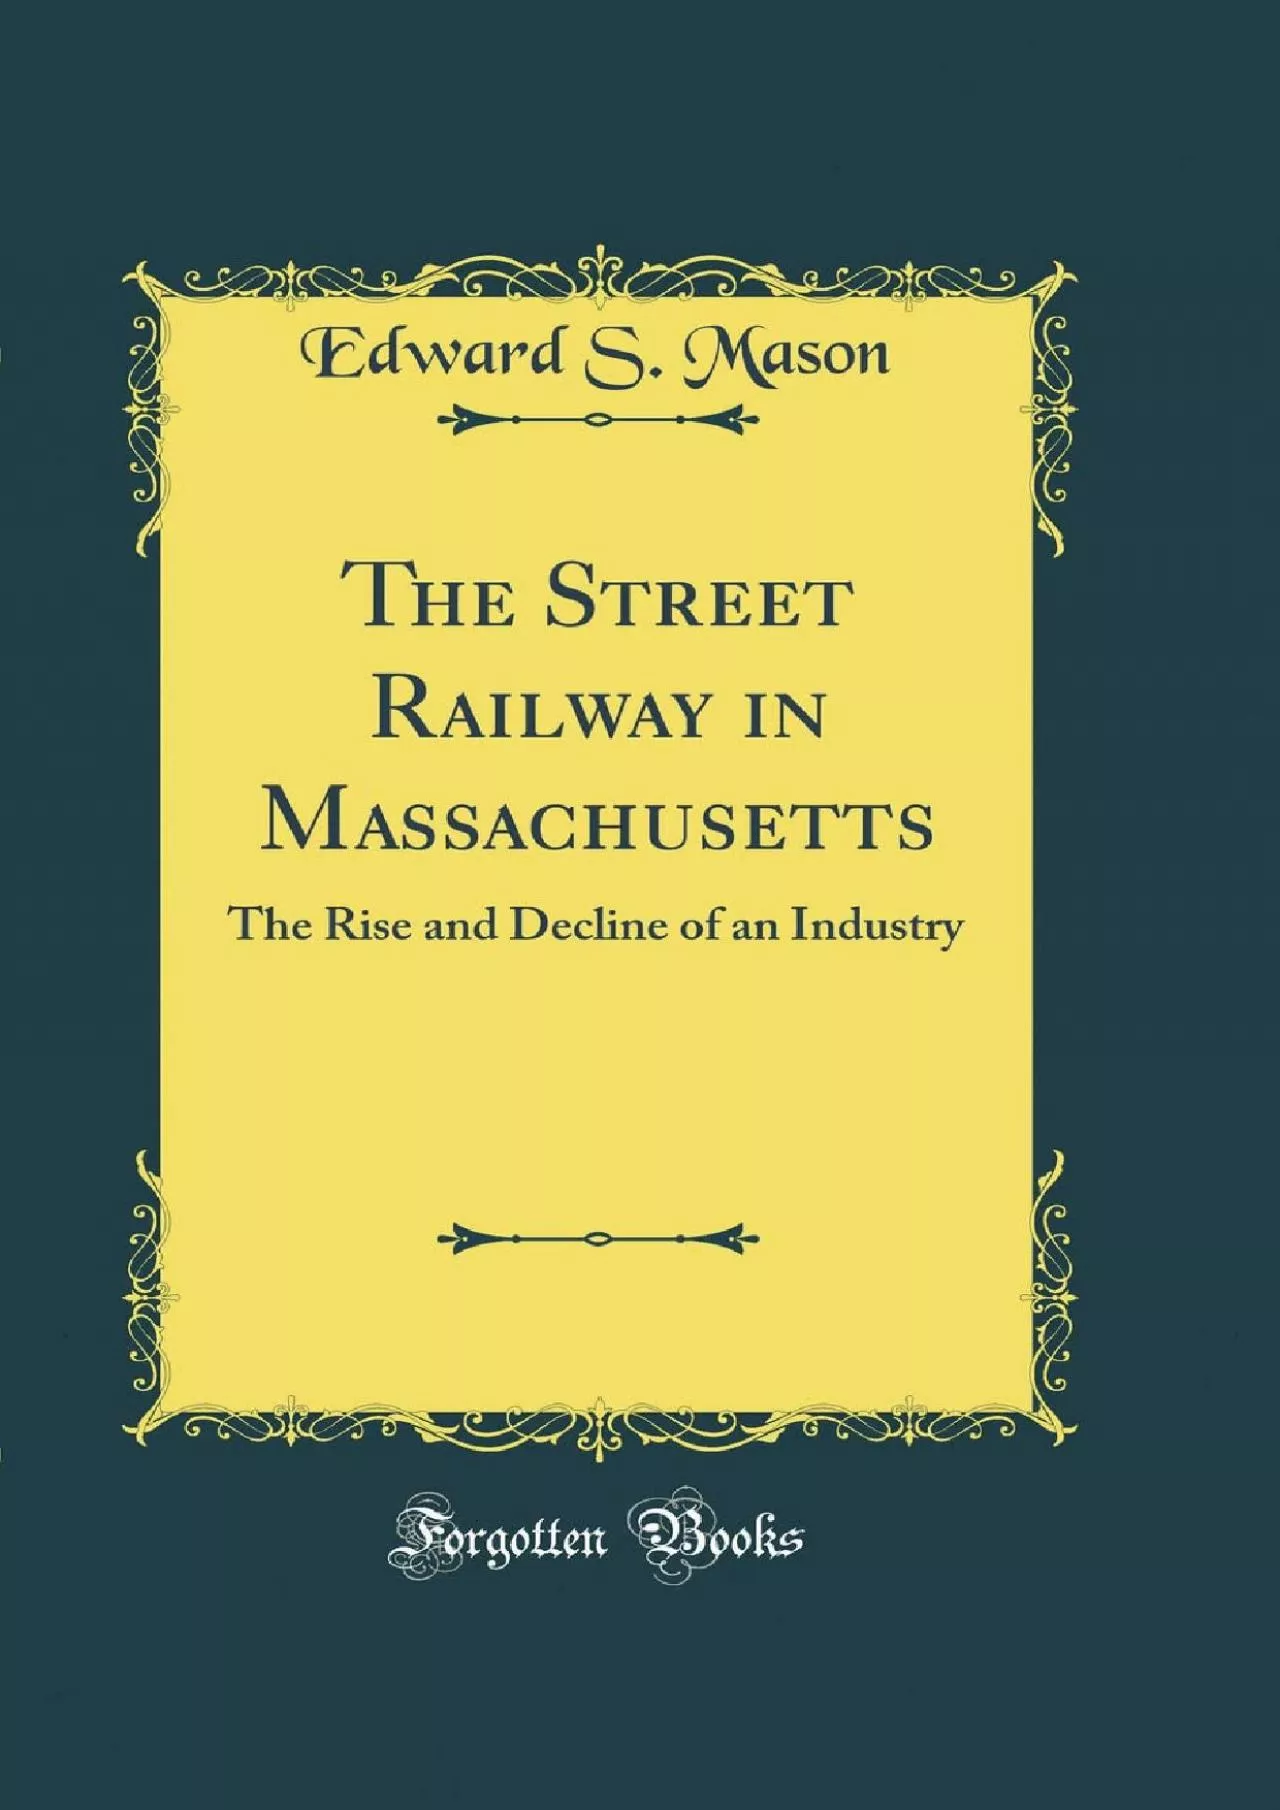 (DOWNLOAD)-The Street Railway in Massachusetts: The Rise and Decline of an Industry (Classic